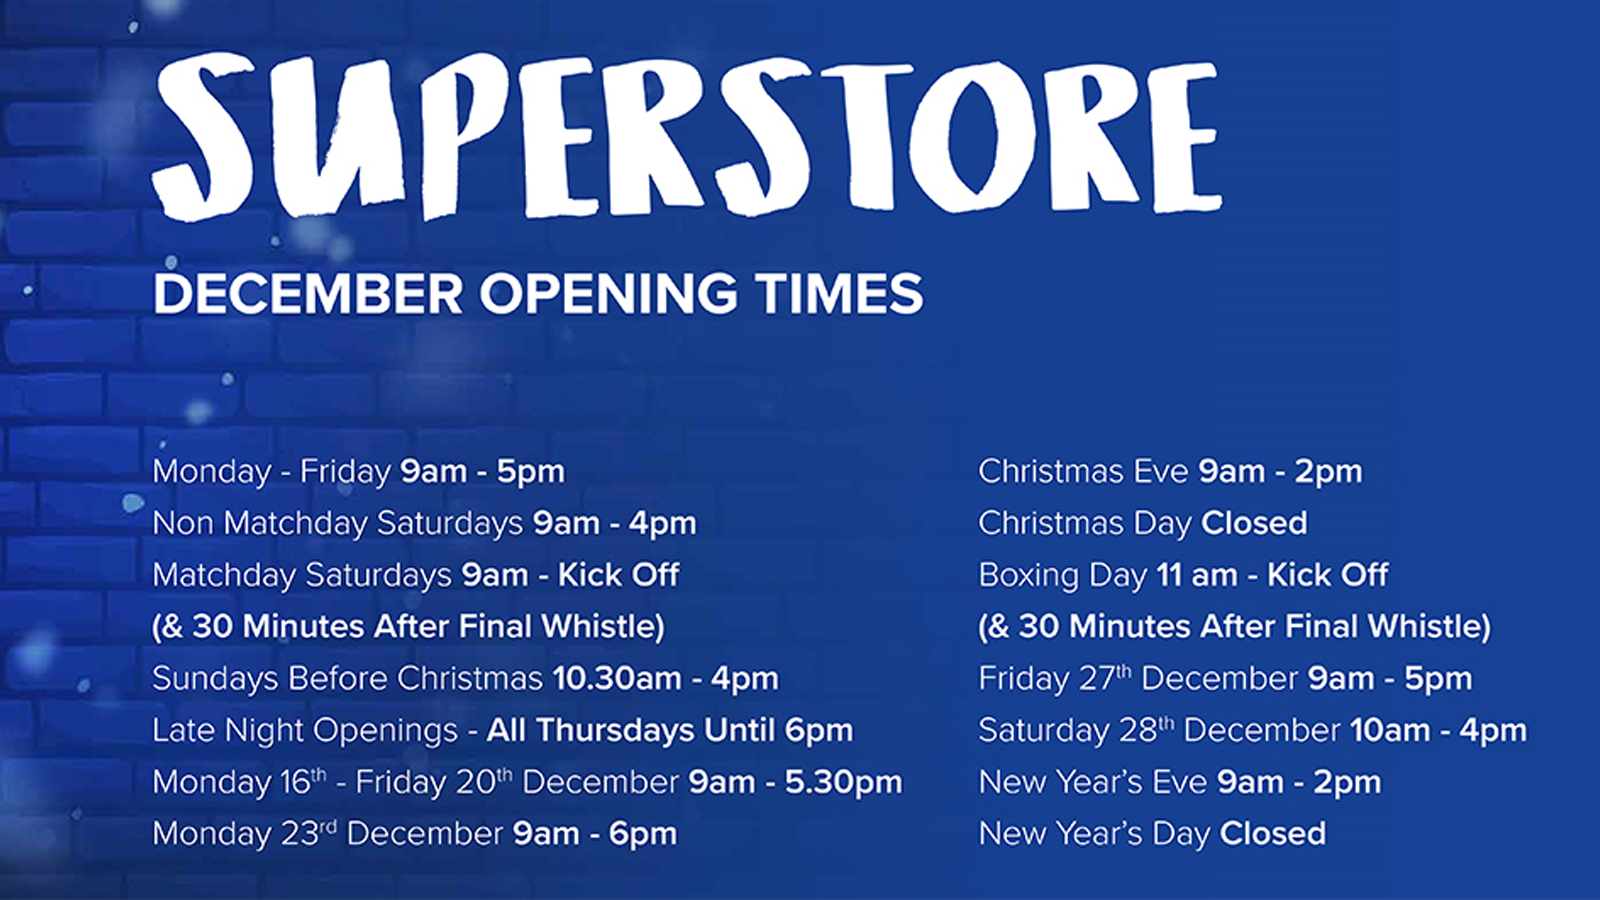 Superstore xmas times